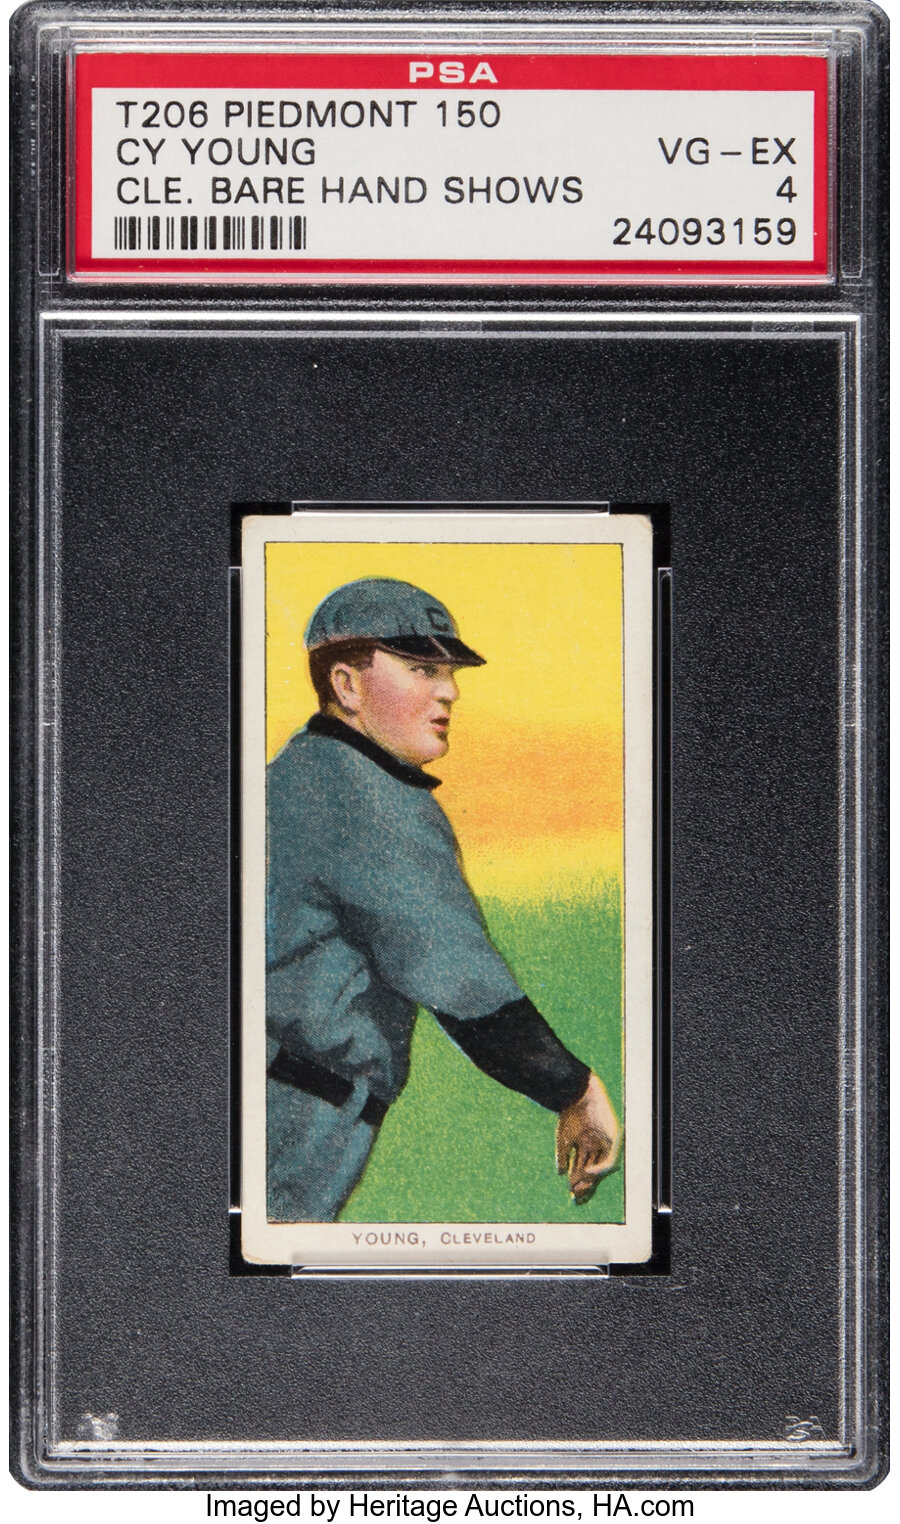 1909-11 T206 Piedmont Cy Young (Bare Hand Shows) PSA VG-EX 4